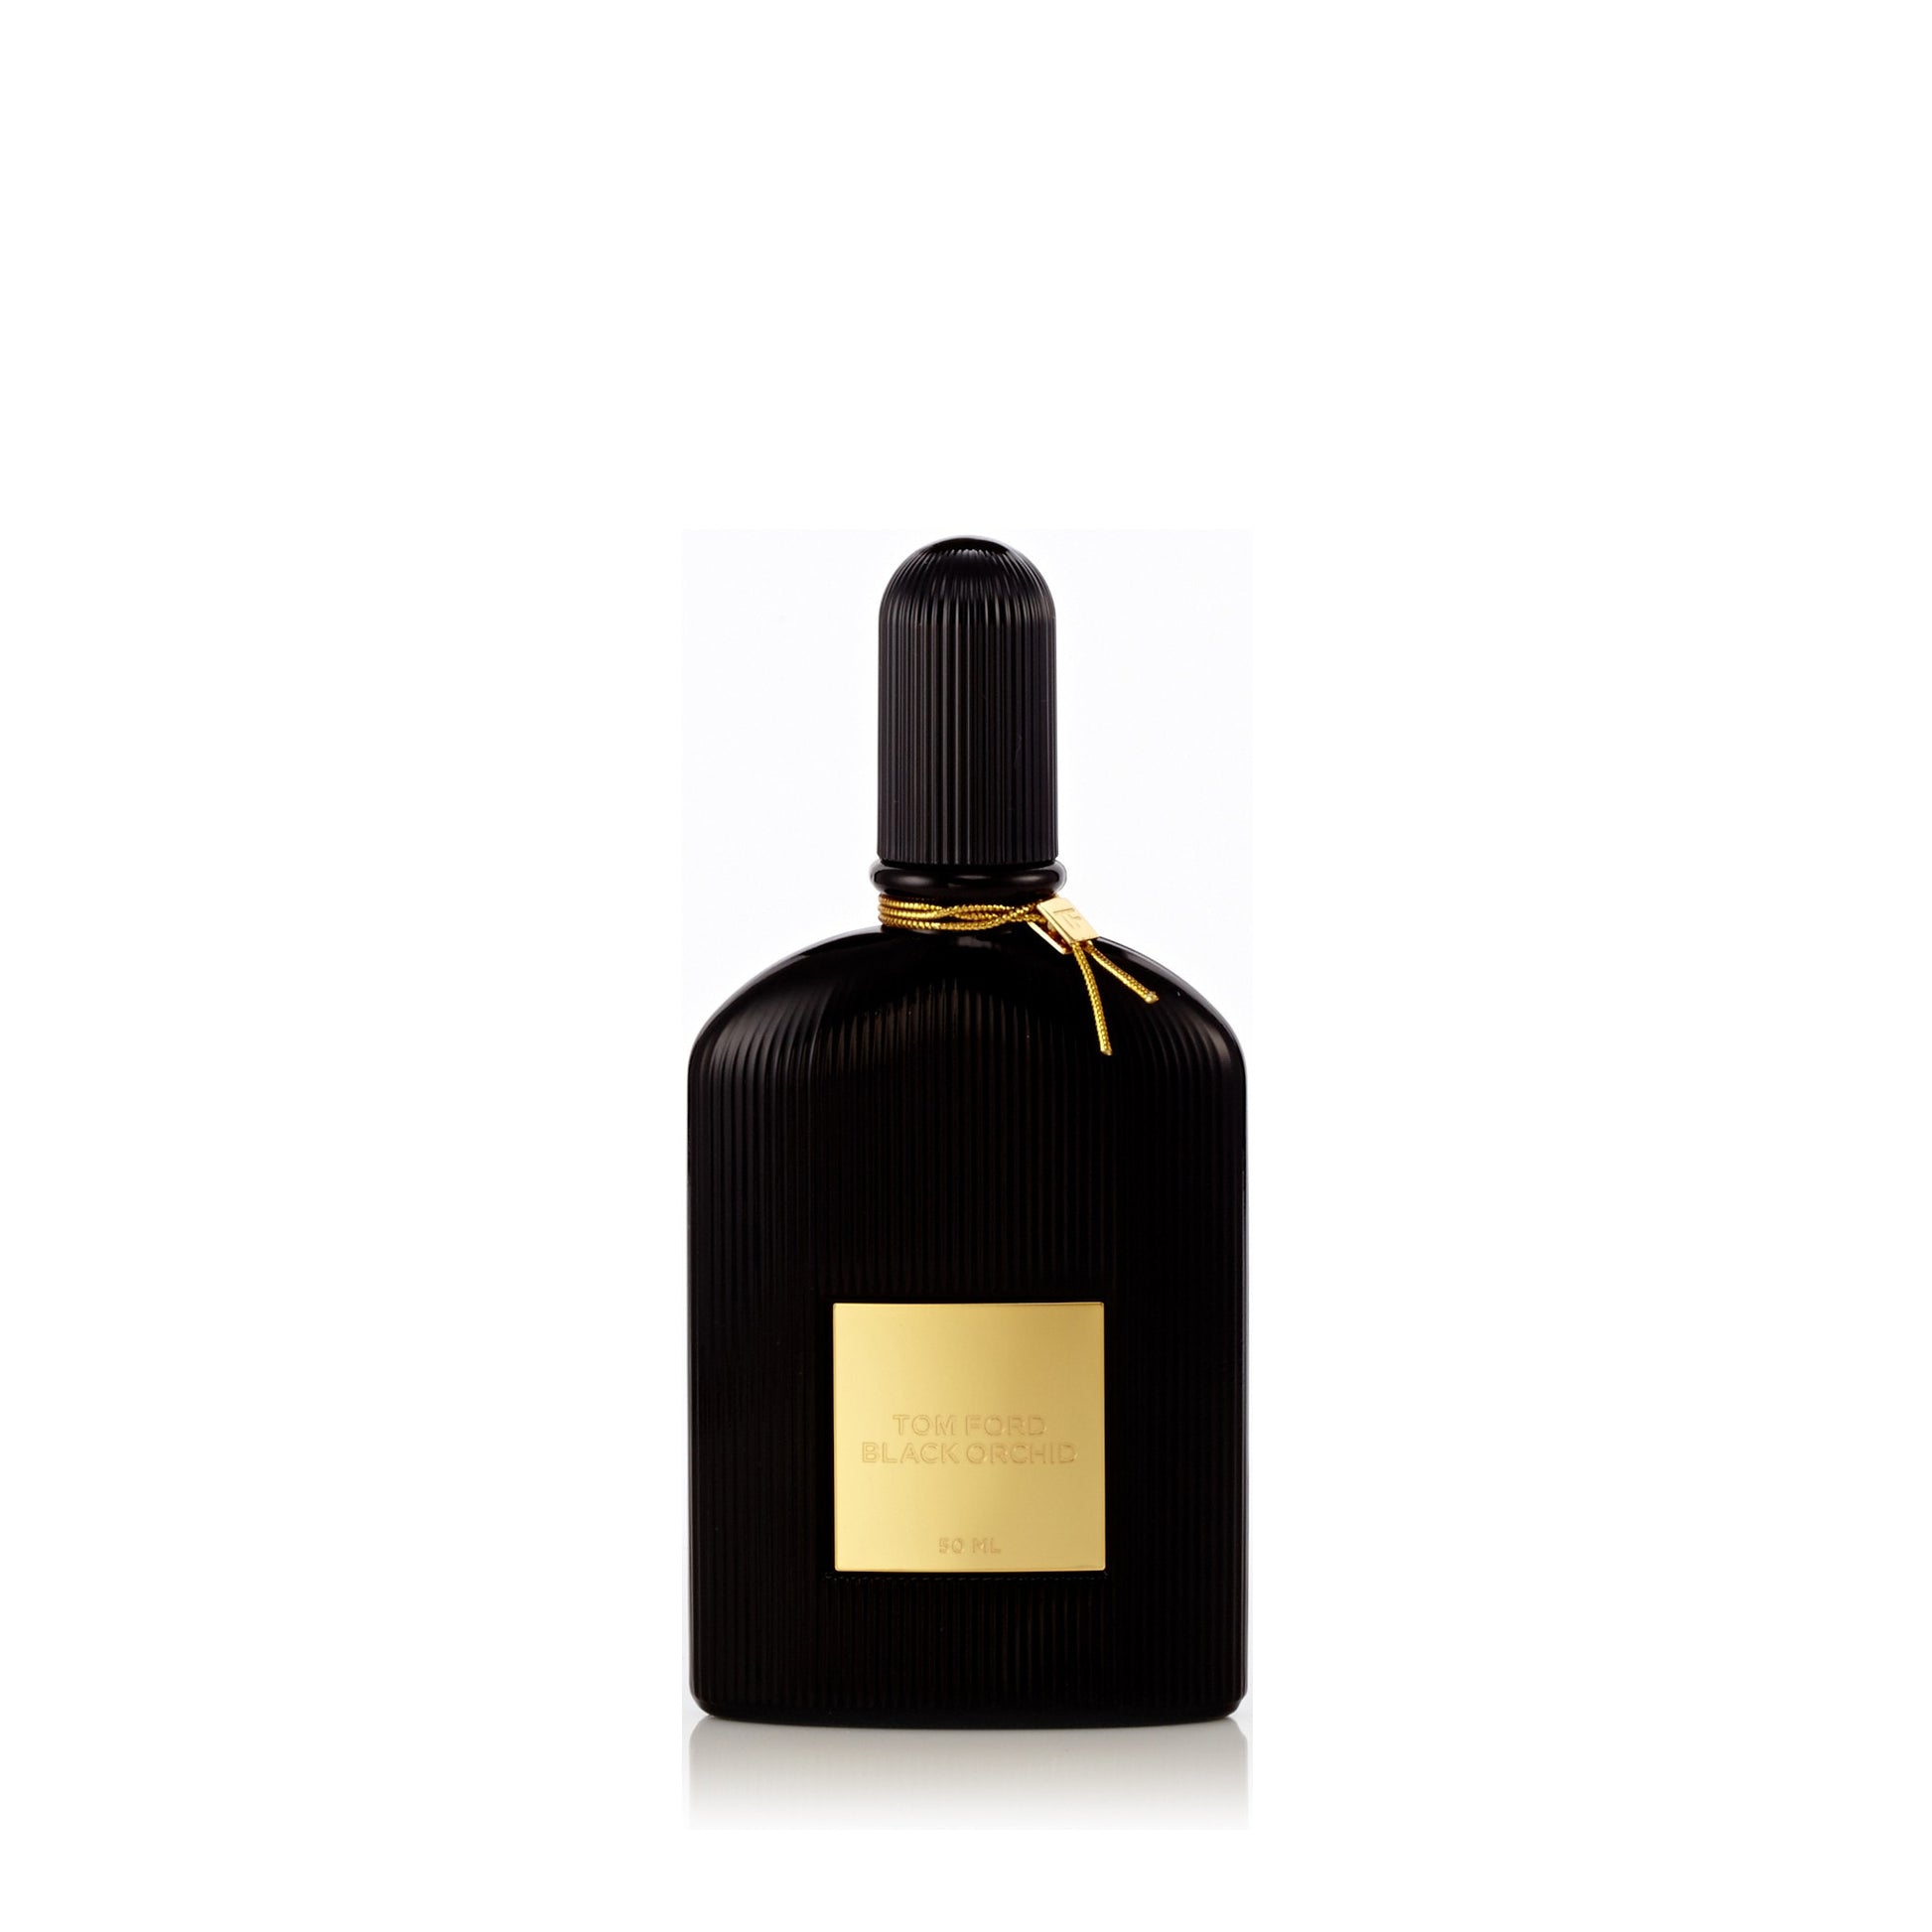 Black Orchid Eau de Parfum Spray for Women by Tom Ford, Product image 3